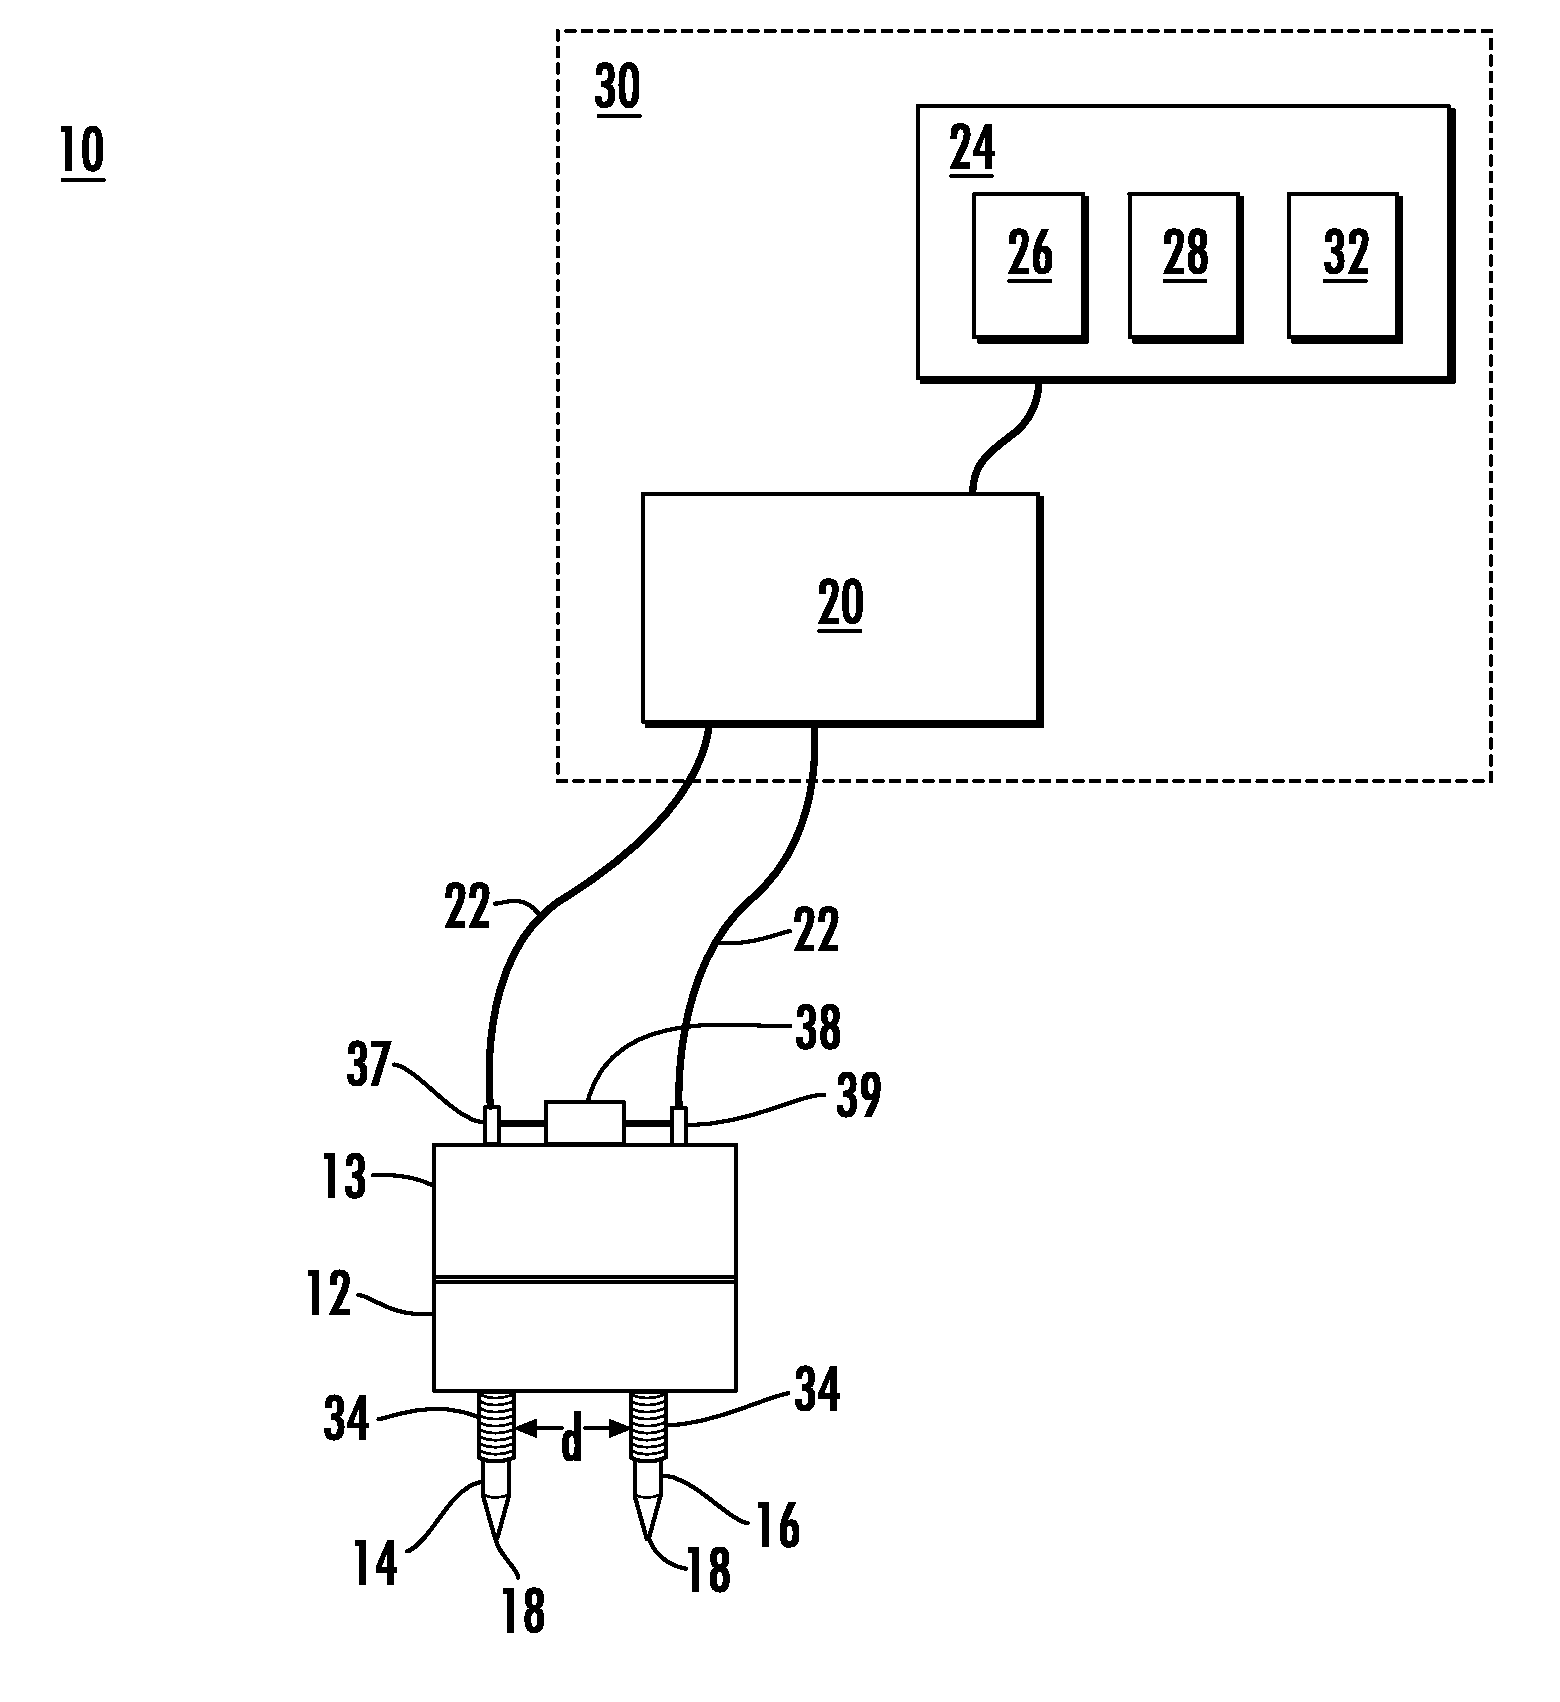 System and method for applying plasma sparks to tissue